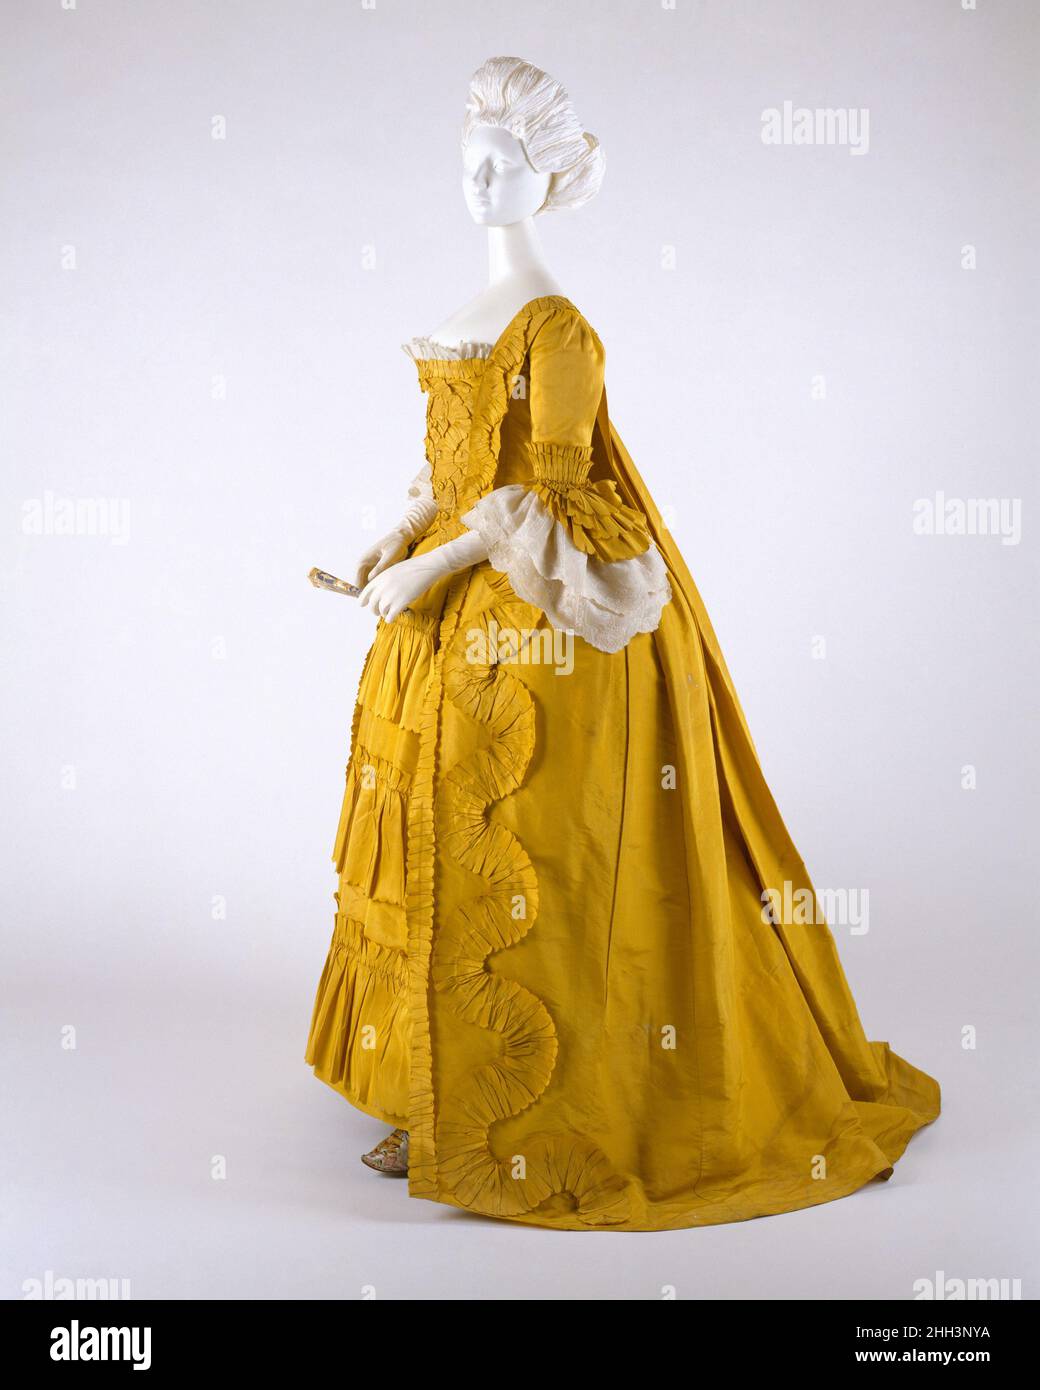 Dress ca. 1760 British Monochrome, but in a bright canary yellow guaranteed to catch anyone's attention across a room, this exceptionally well-preserved robe à la française with trimmings represents the apogee of the form. The absence of ornament, other than basic ruffles, makes this a museum object easy to read: it is a perfect teaching example, free from distractions and affirming thereby the adorned beauty of eighteenth-century silhouette and style, so often masked under frills and coquetry.. Dress. British. ca. 1760. silk, linen, cotton Stock Photo